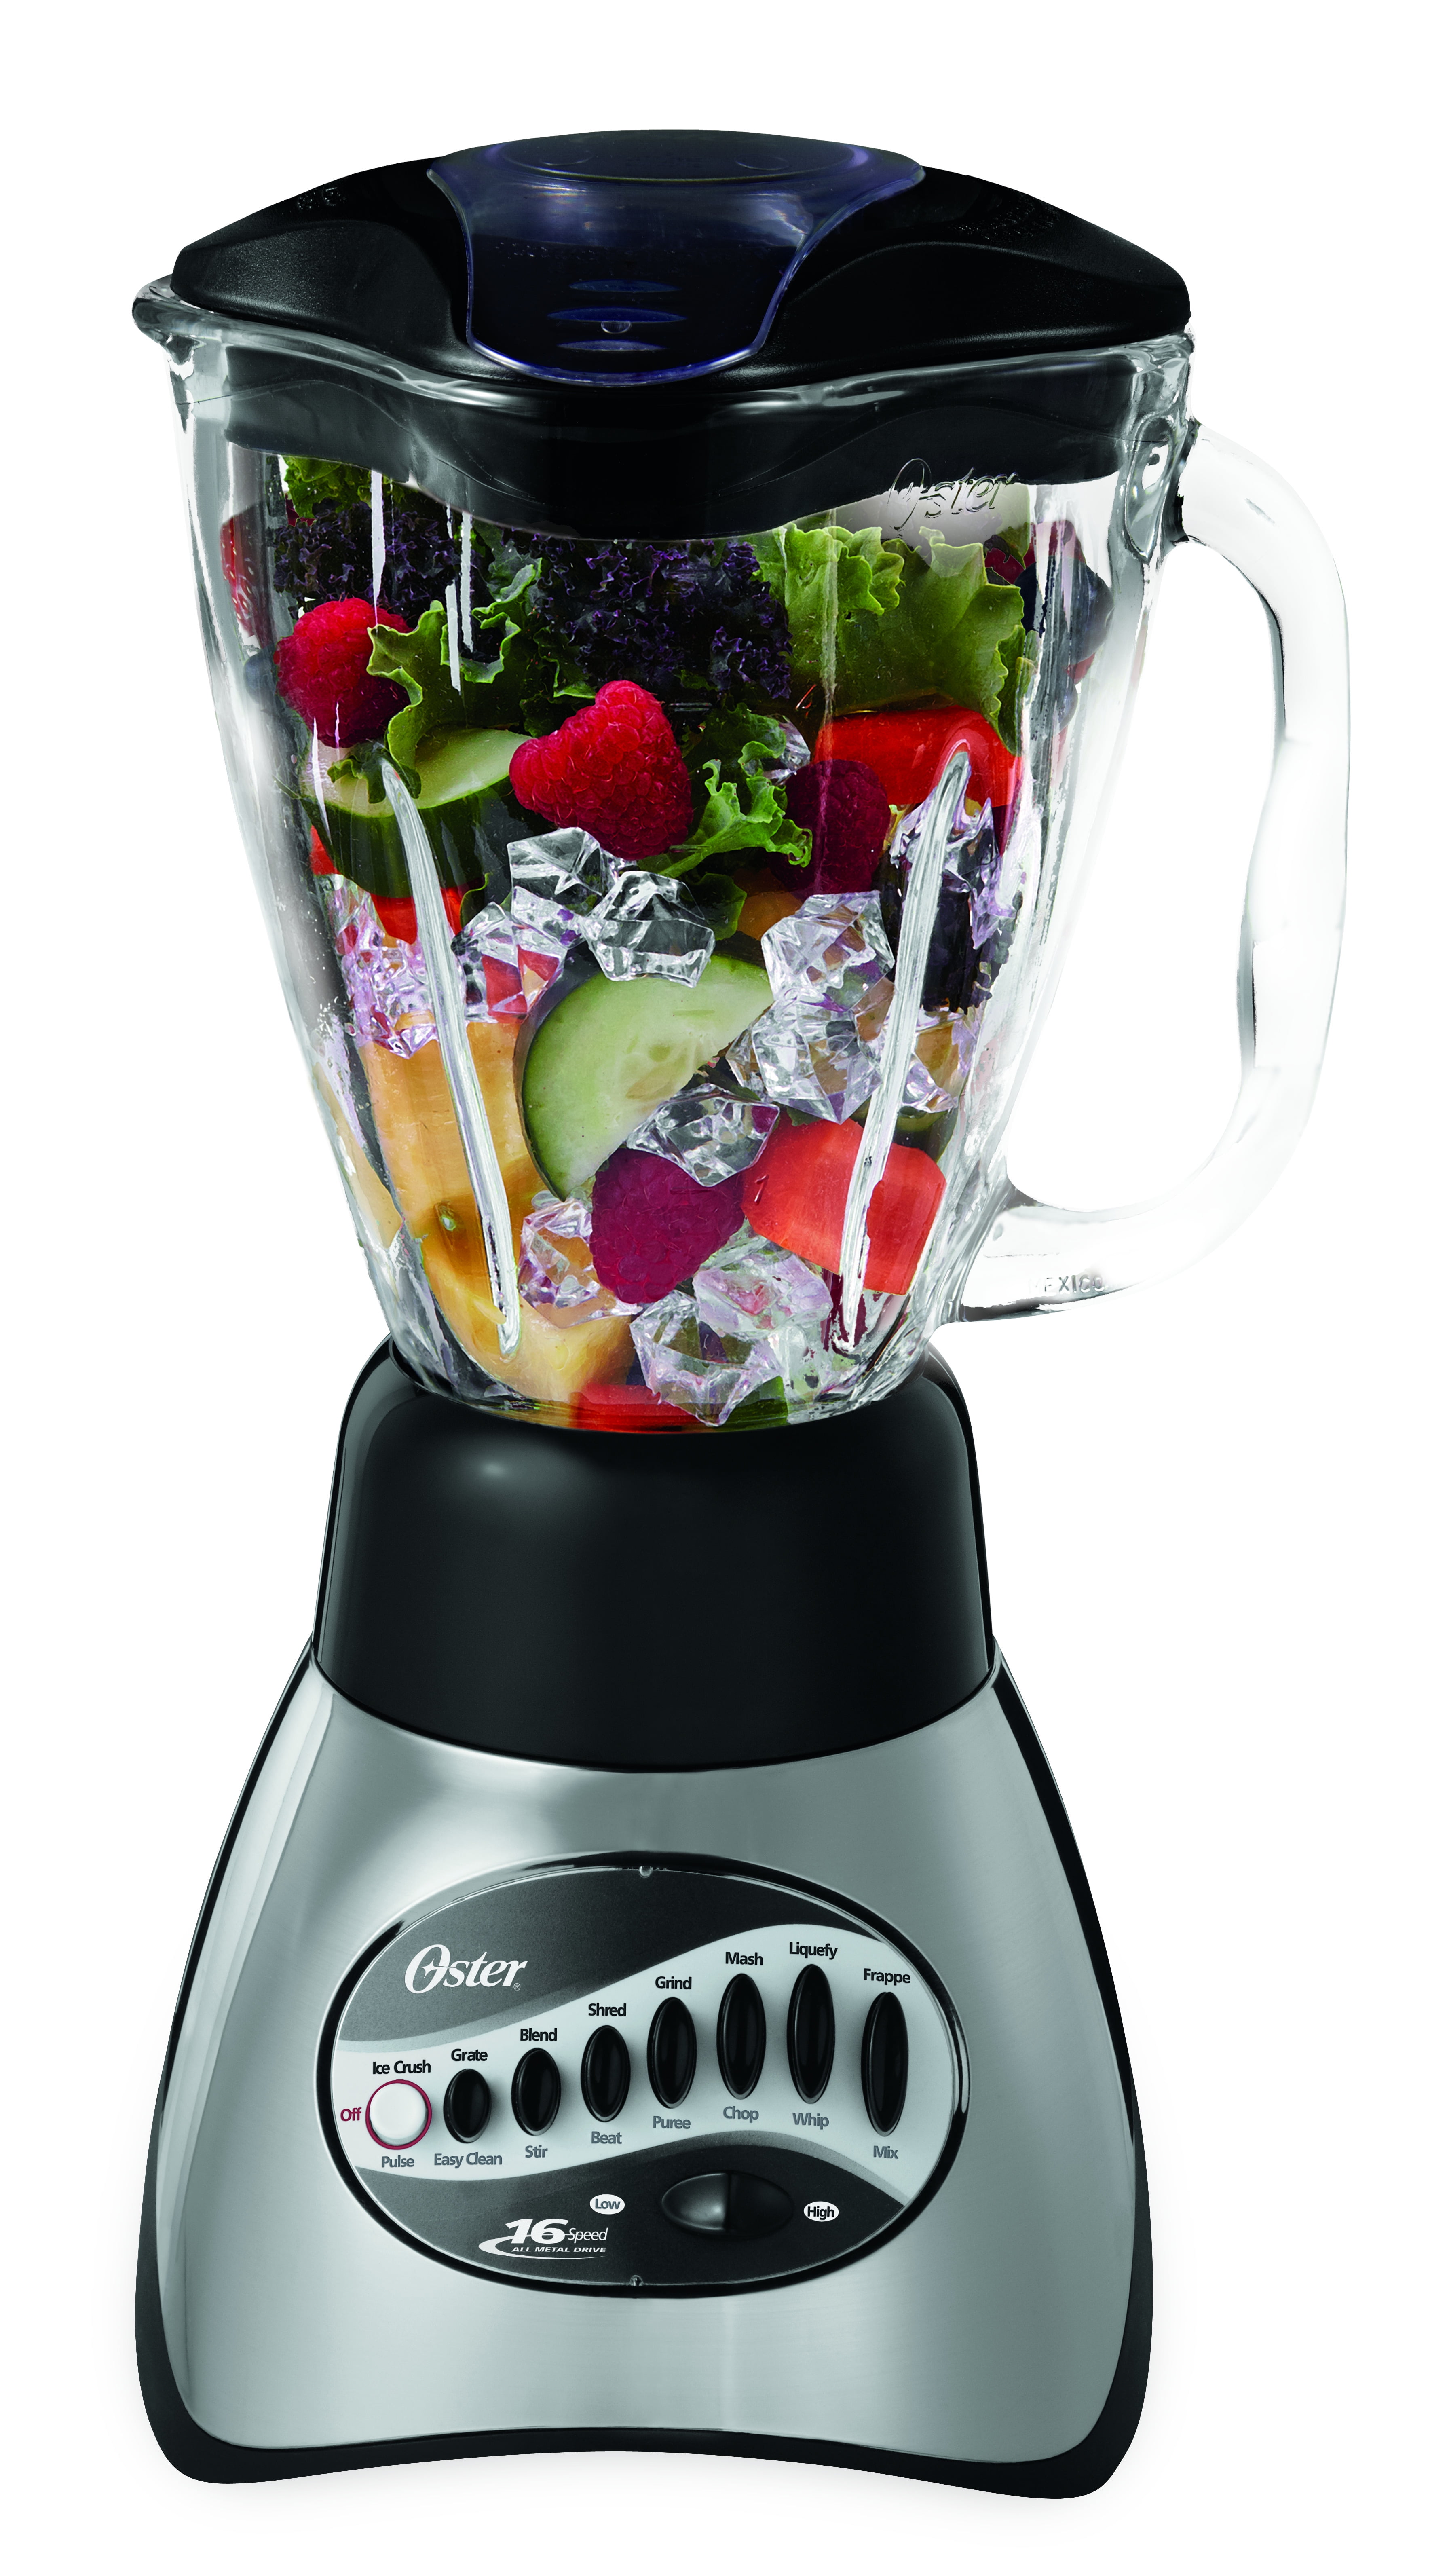 NEW IN BOX Oster Personal Blender